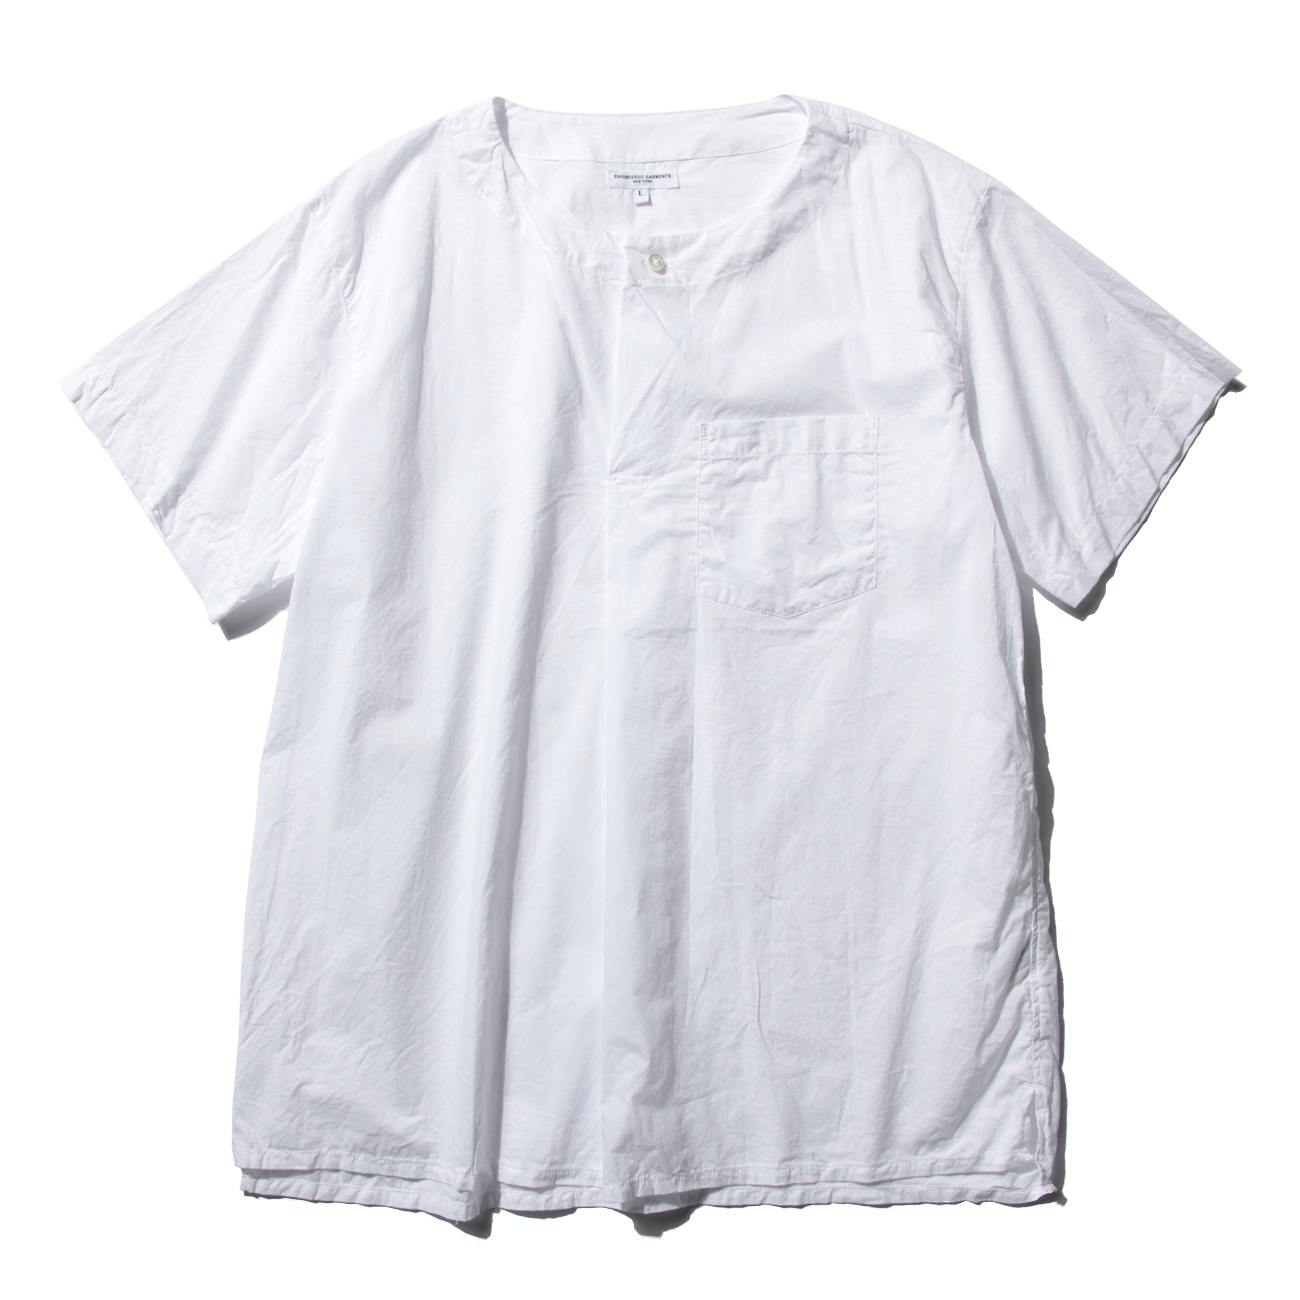 MED Shirt - High Count Cotton Lawn - White